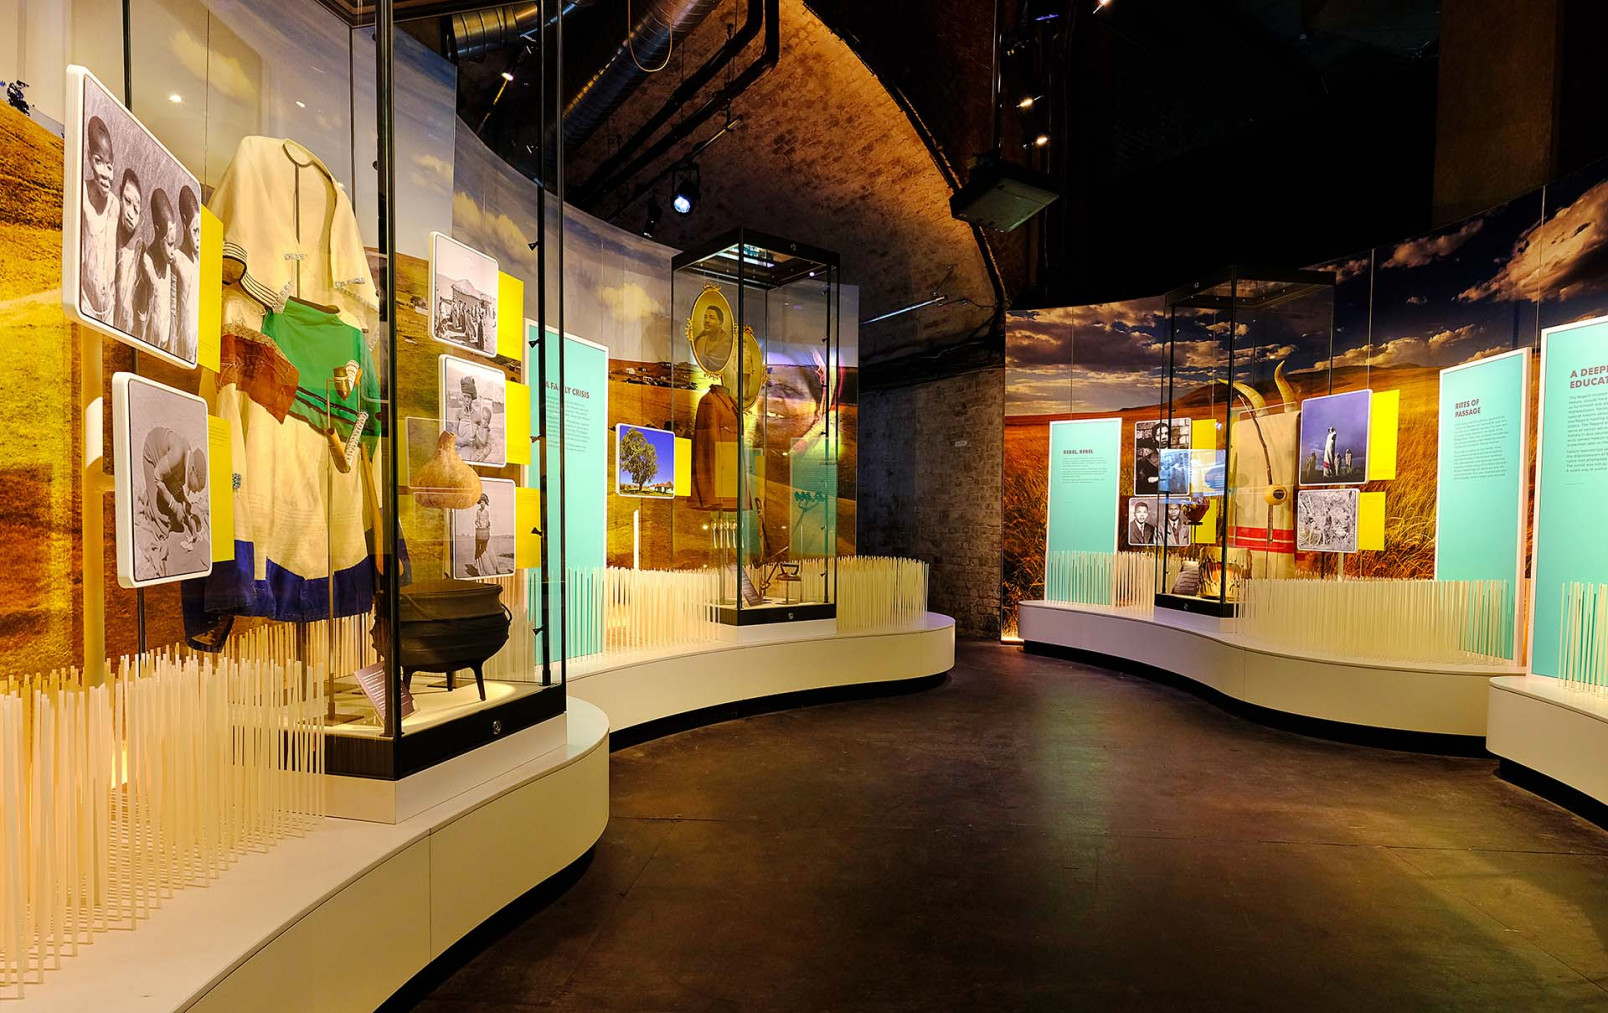 Nelson Mandela Exhibition: View of a Multiple Exhibits